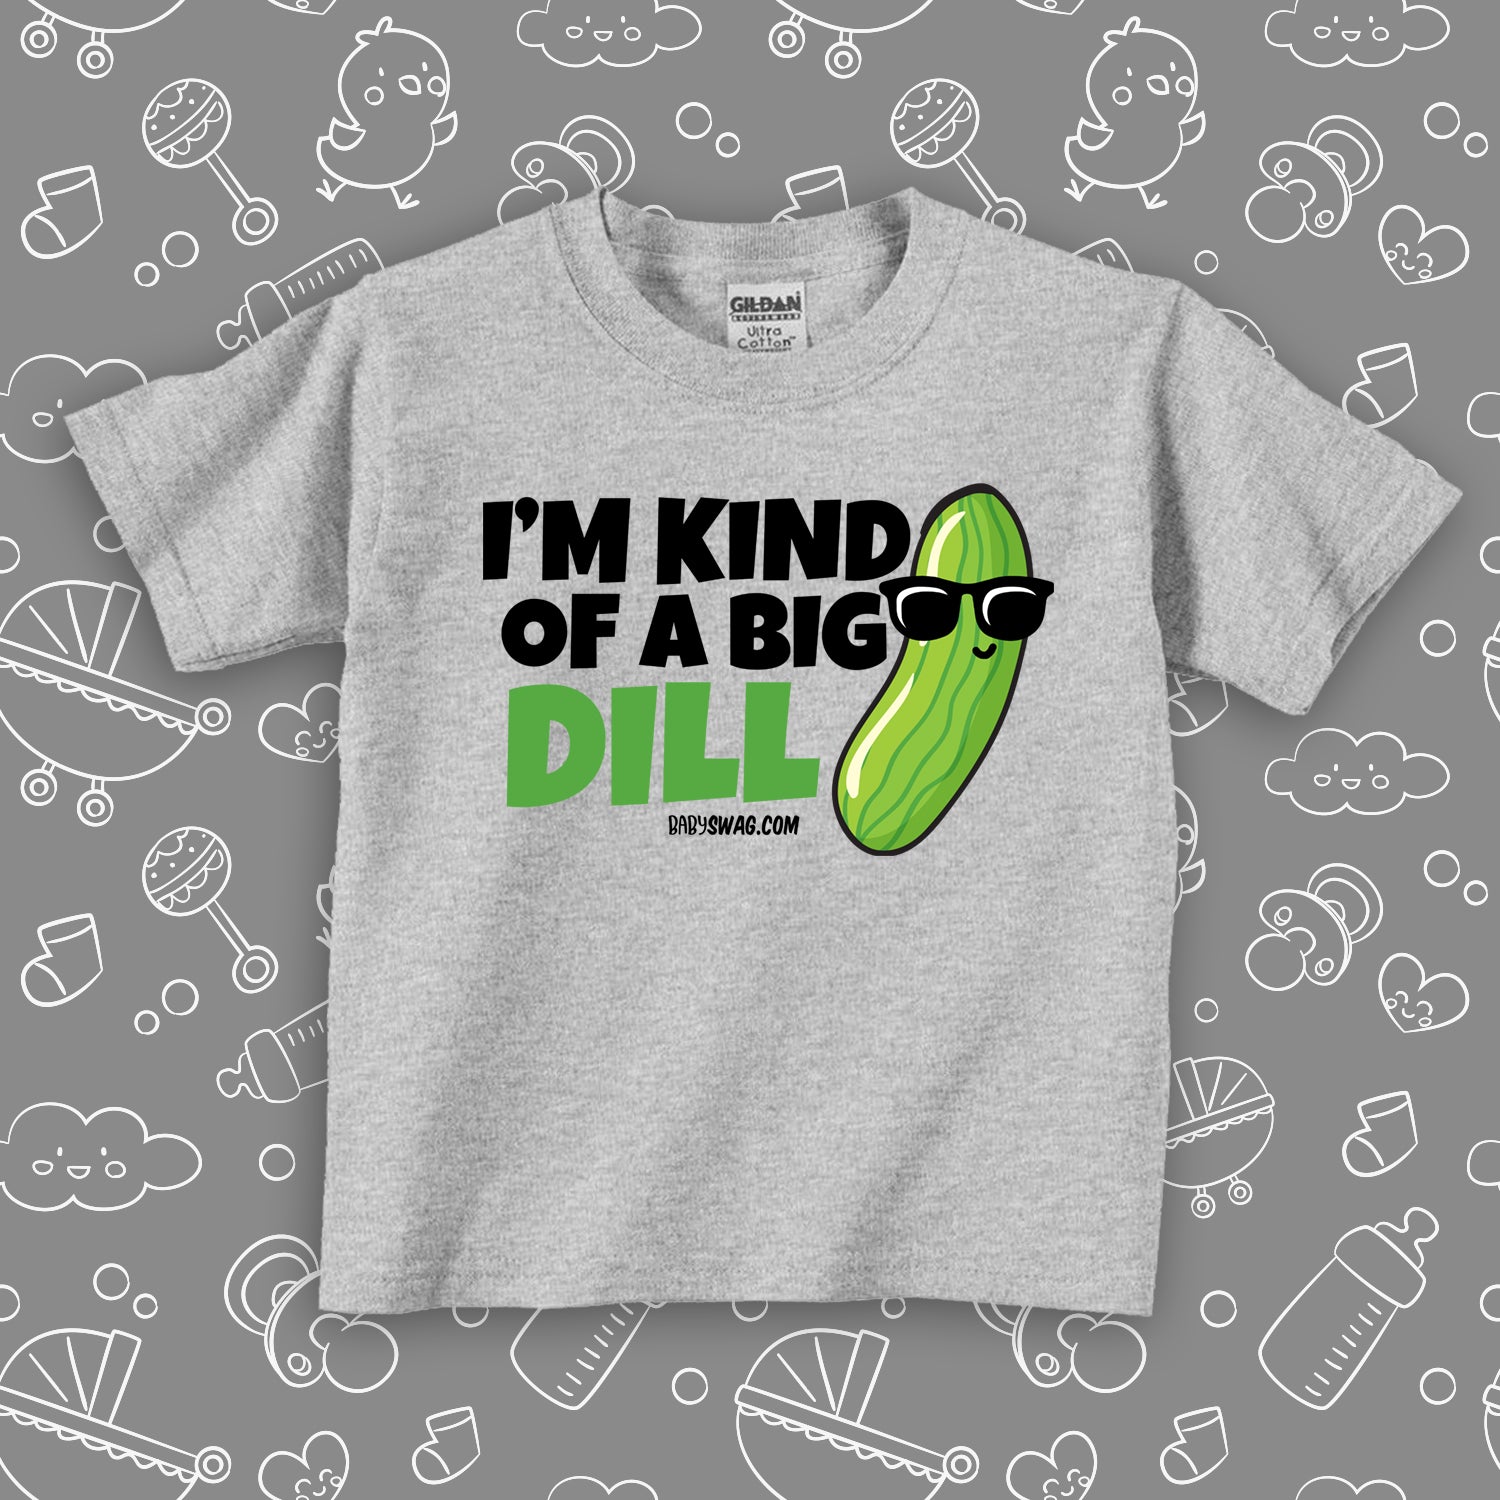 The Big Dill